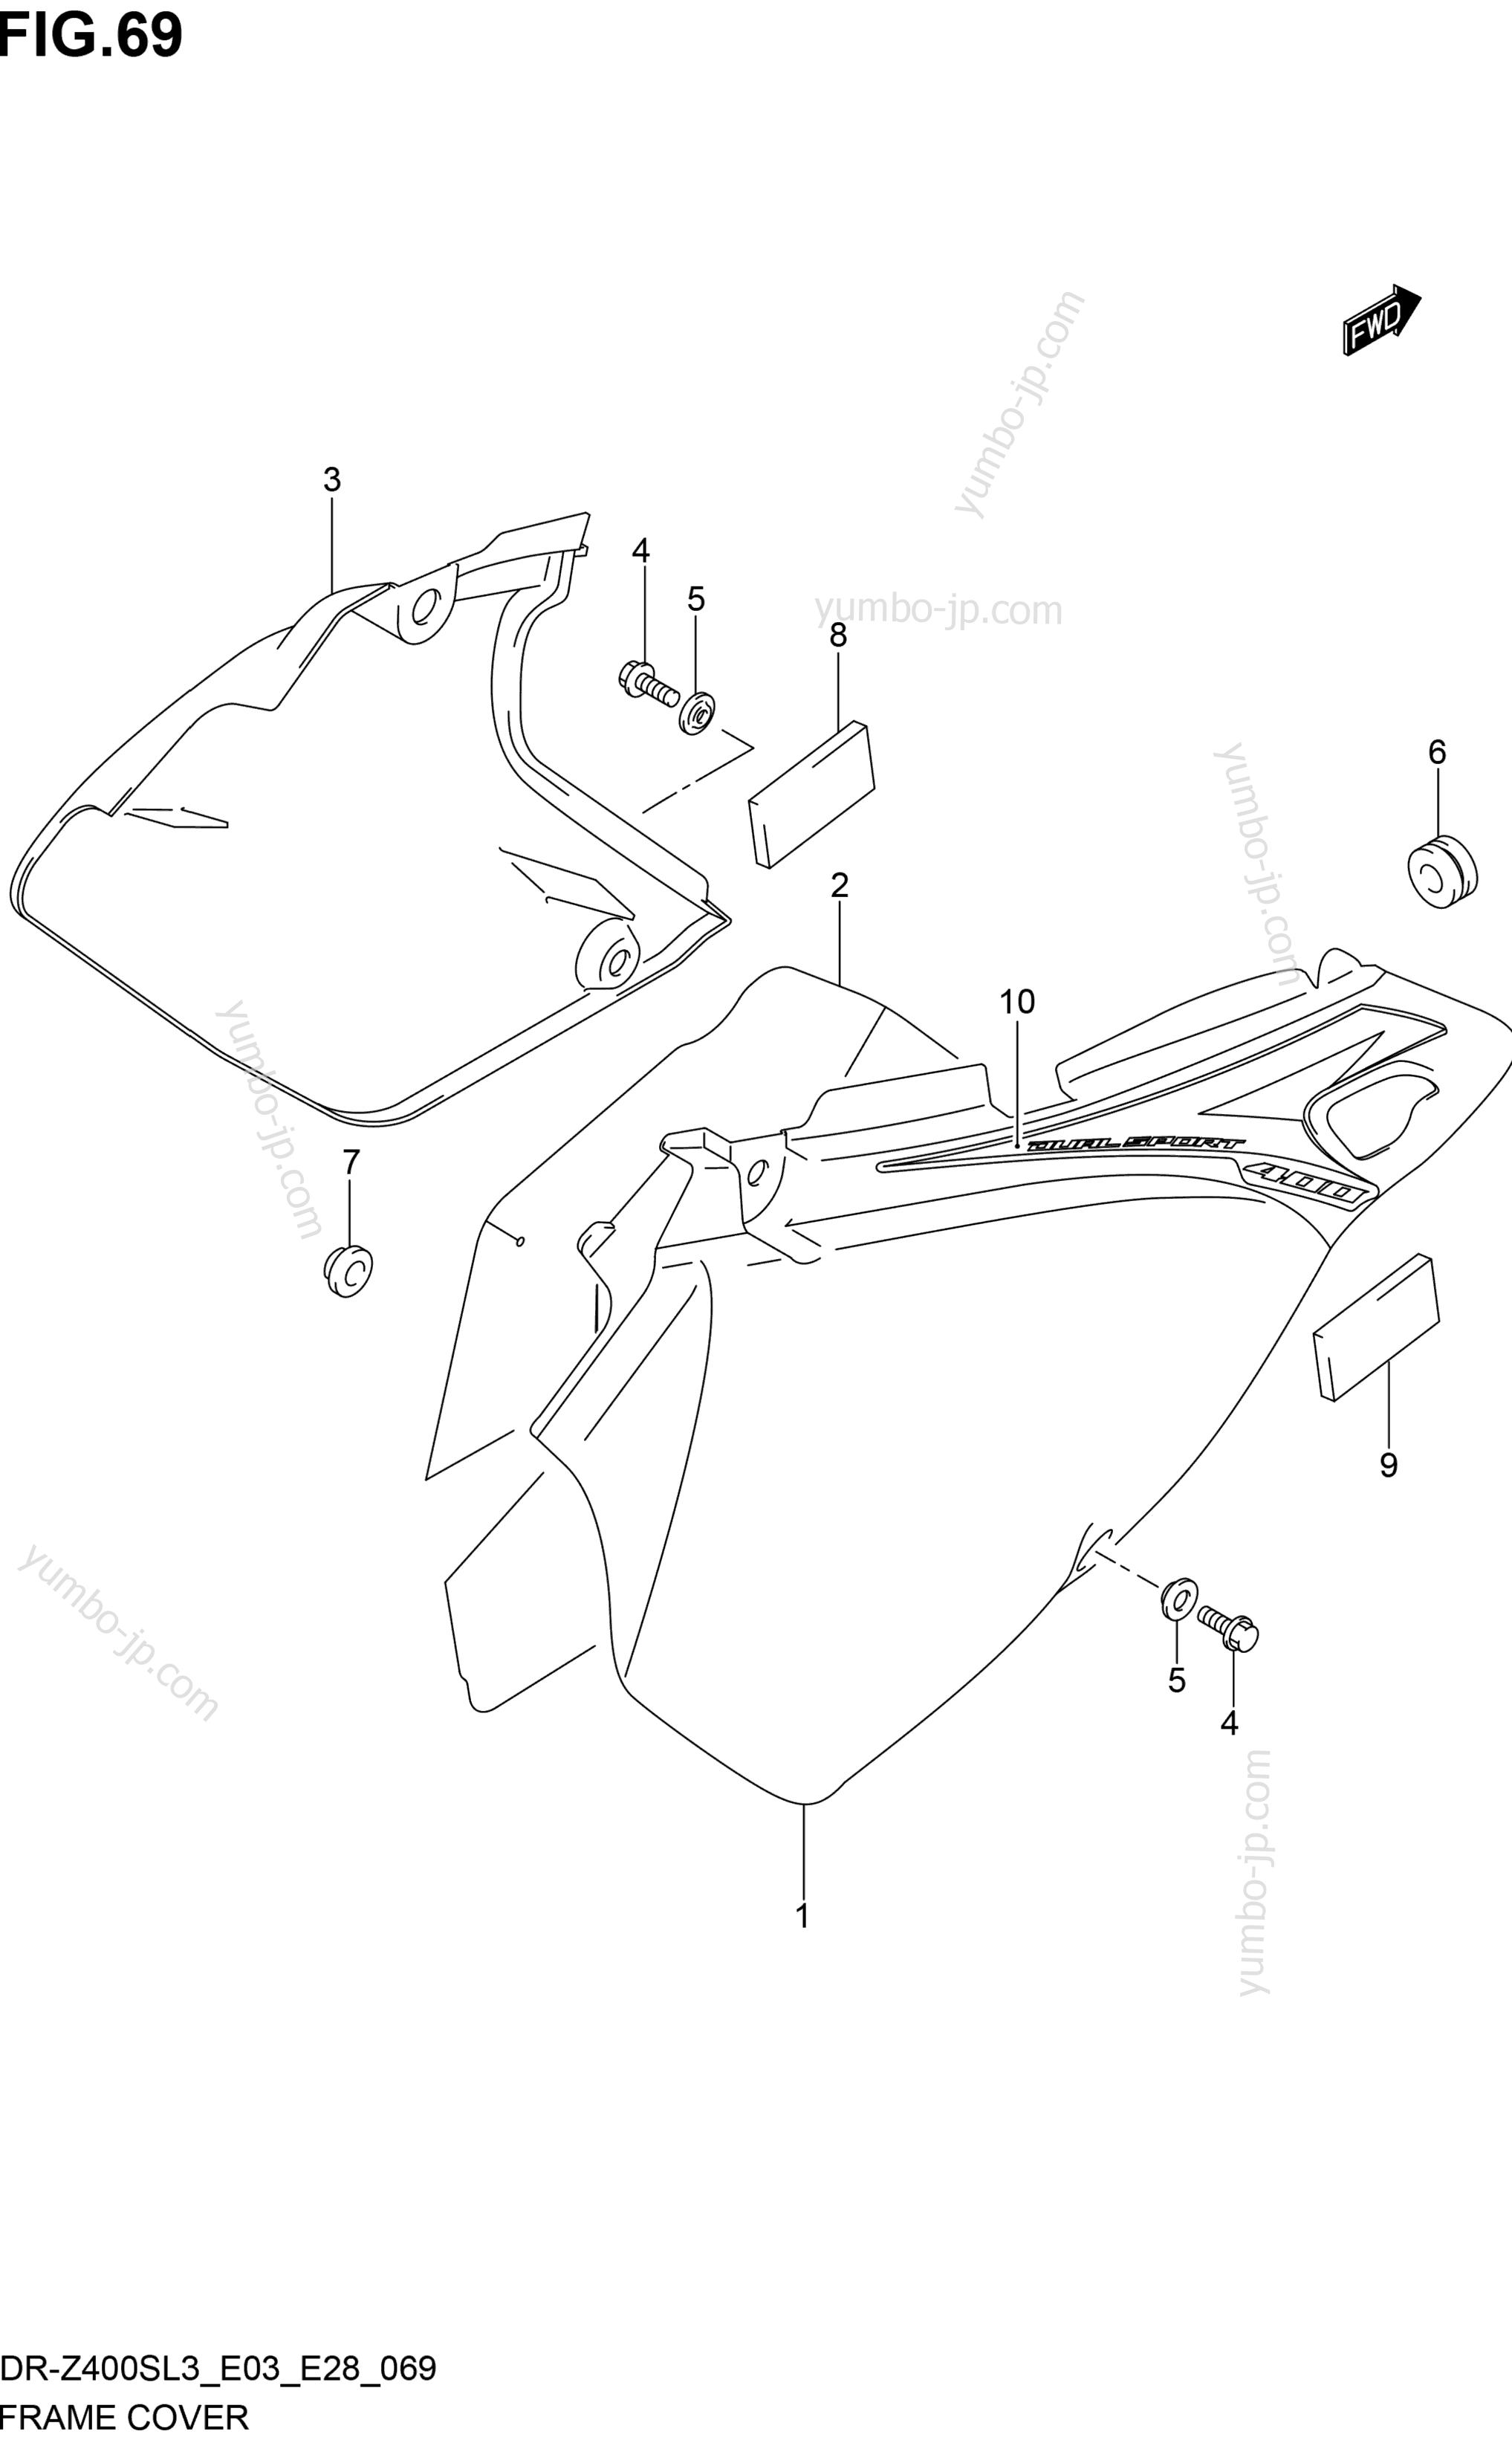 FRAME COVER (DR-Z400SL3 E03) for motorcycles SUZUKI DR-Z400S 2013 year